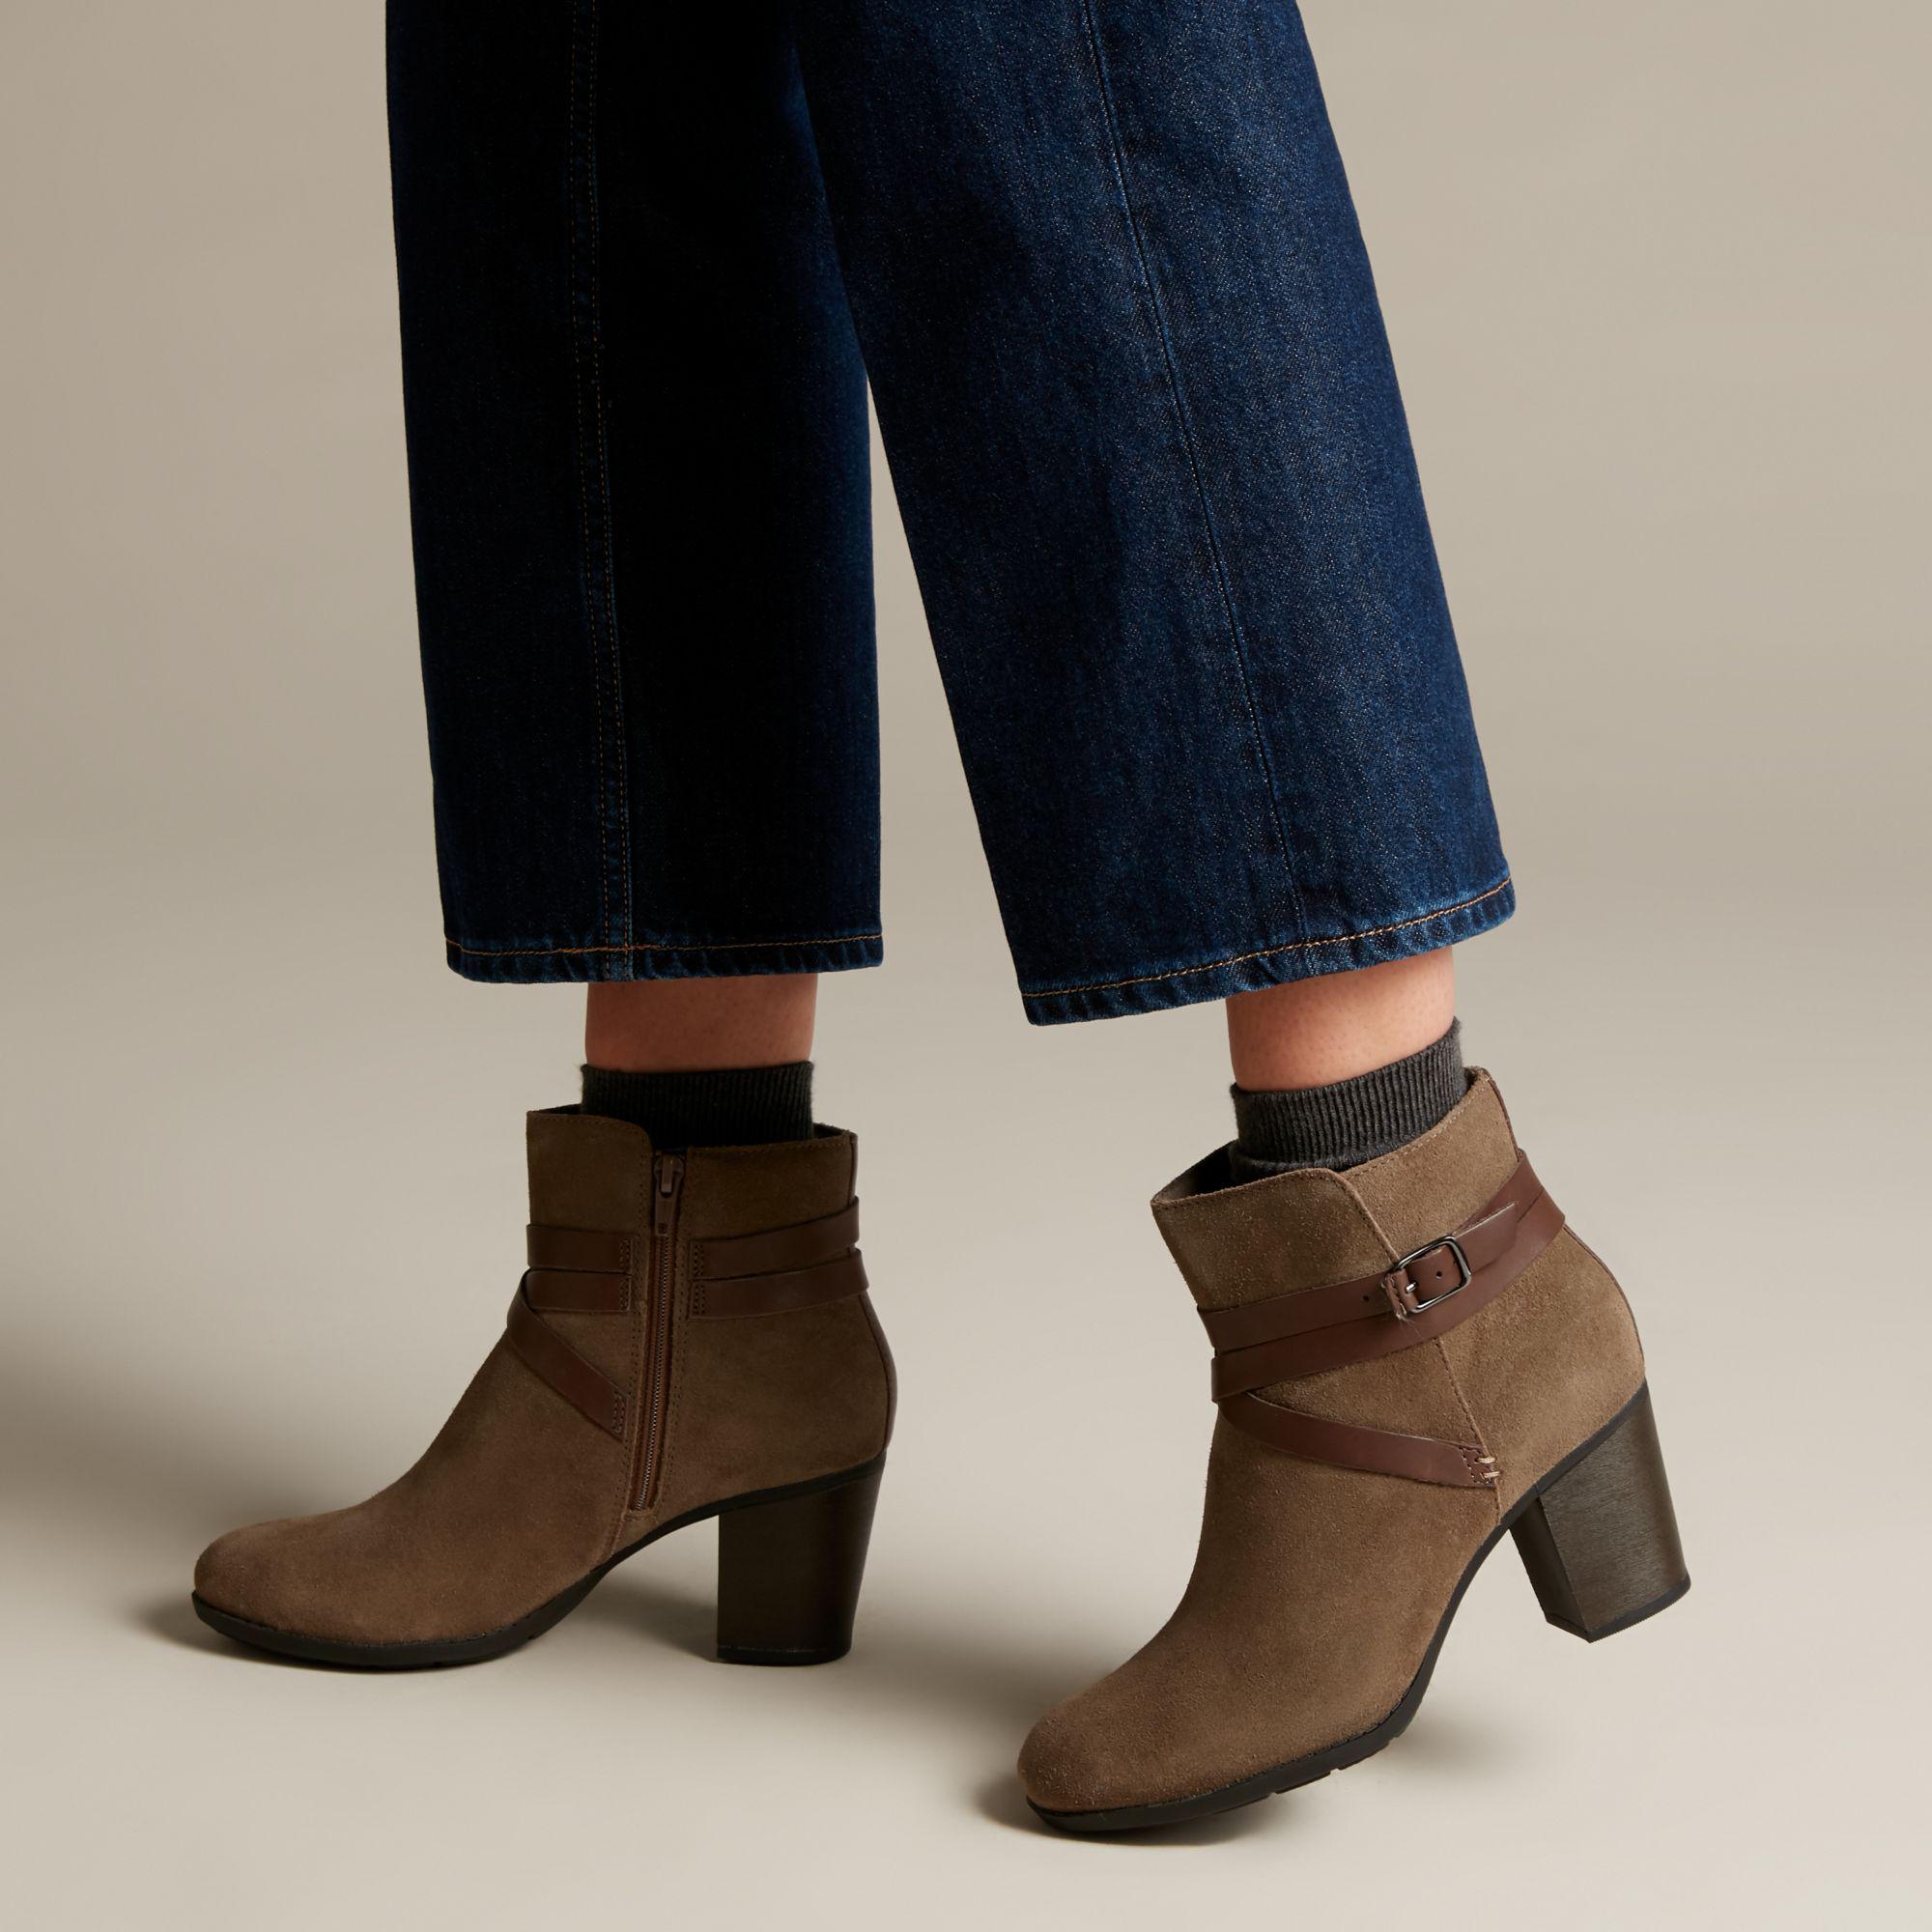 clarks enfield coco boots